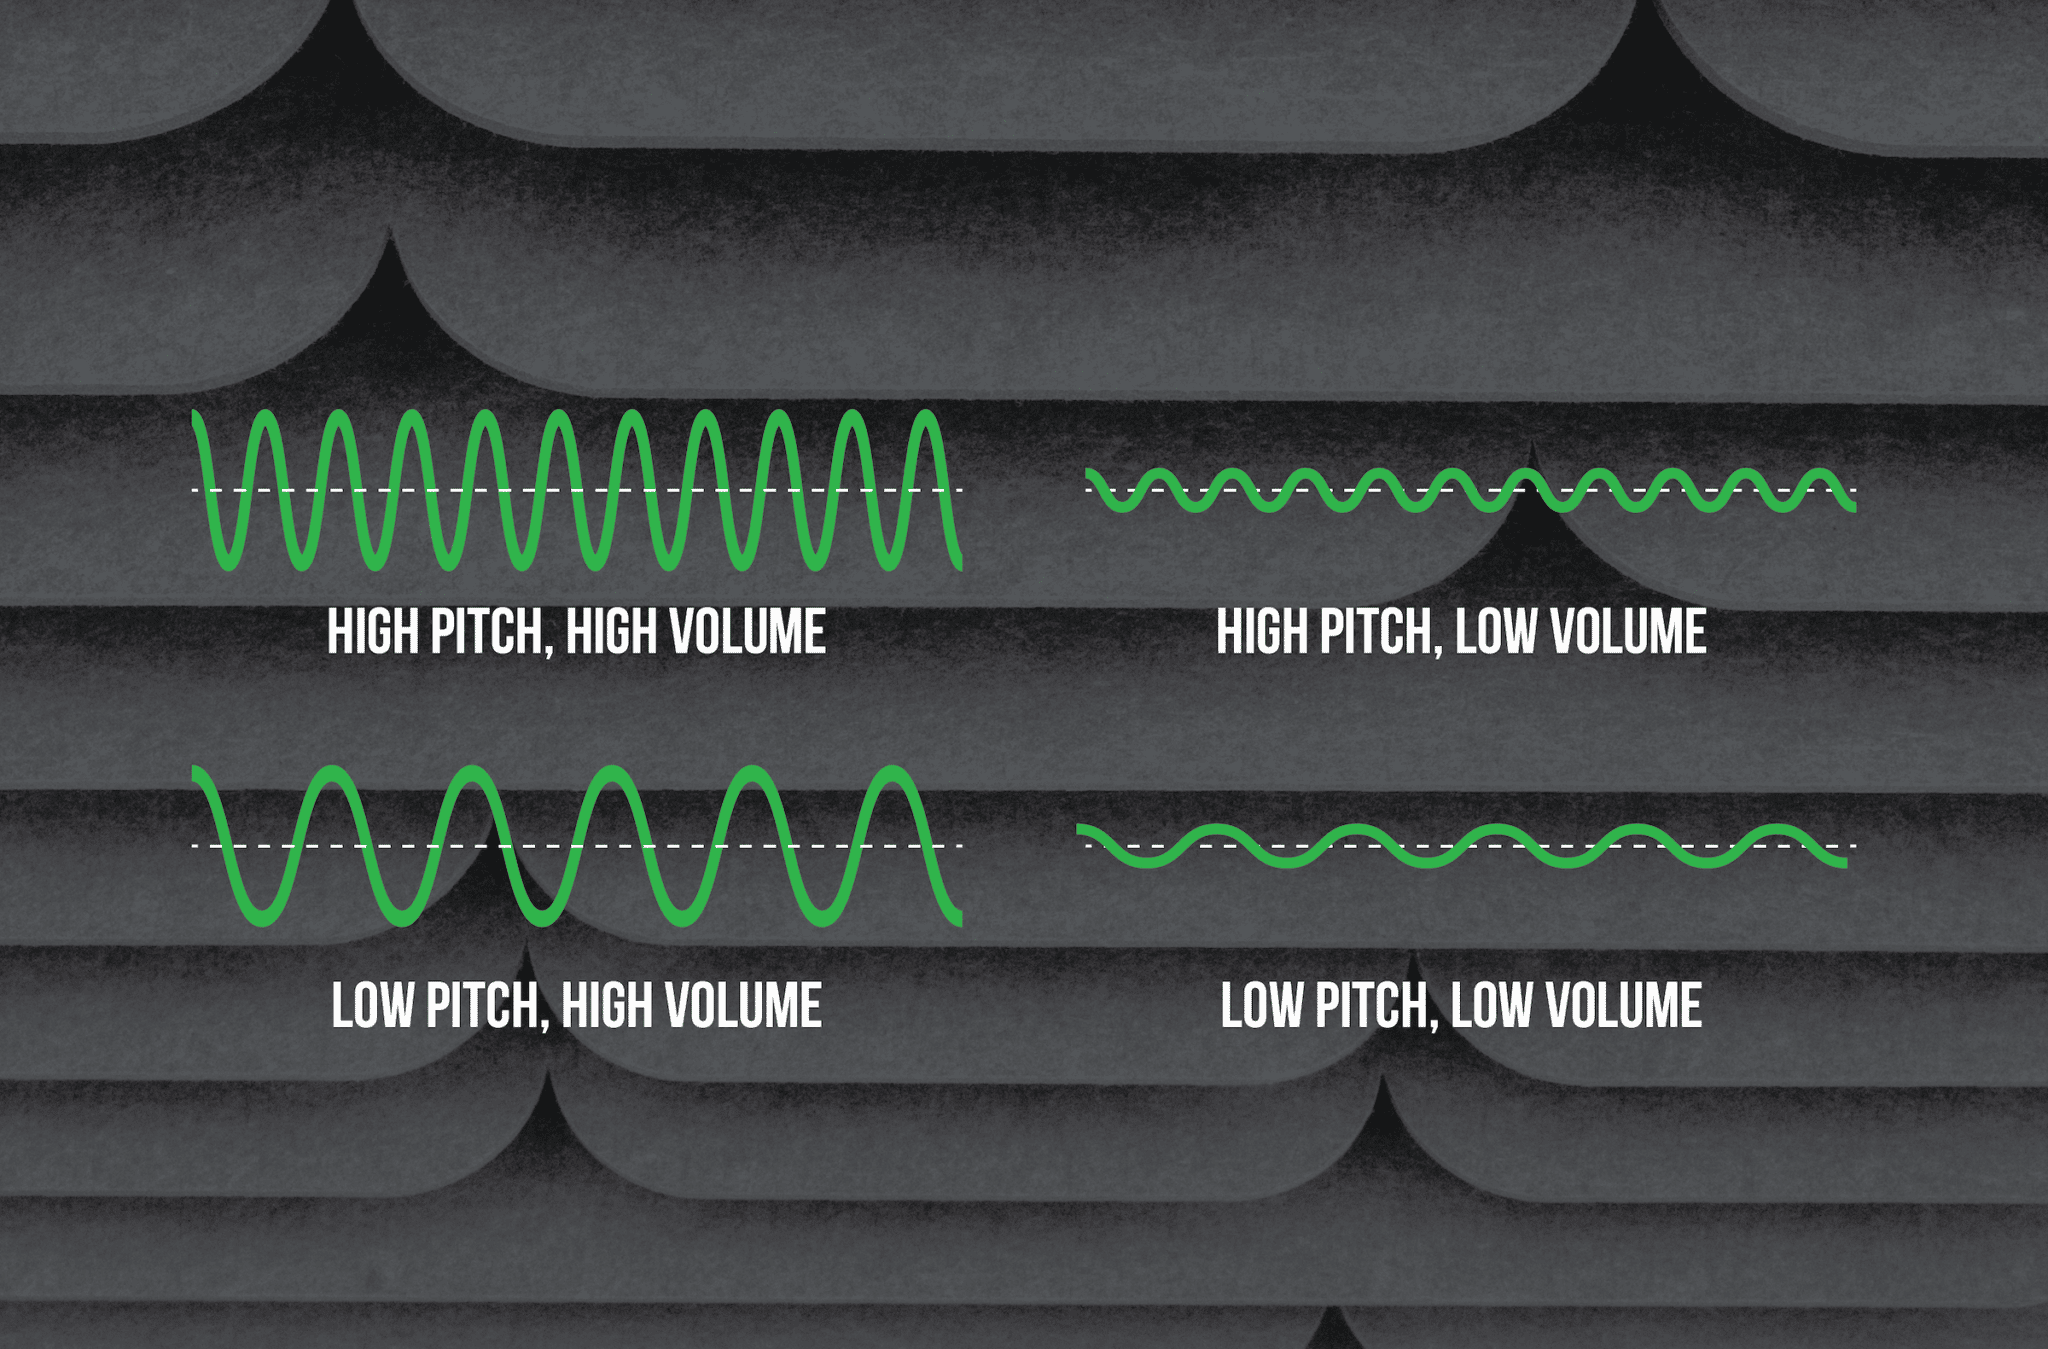 Acoustic sound wave graphs showing pitch and volume of different charts